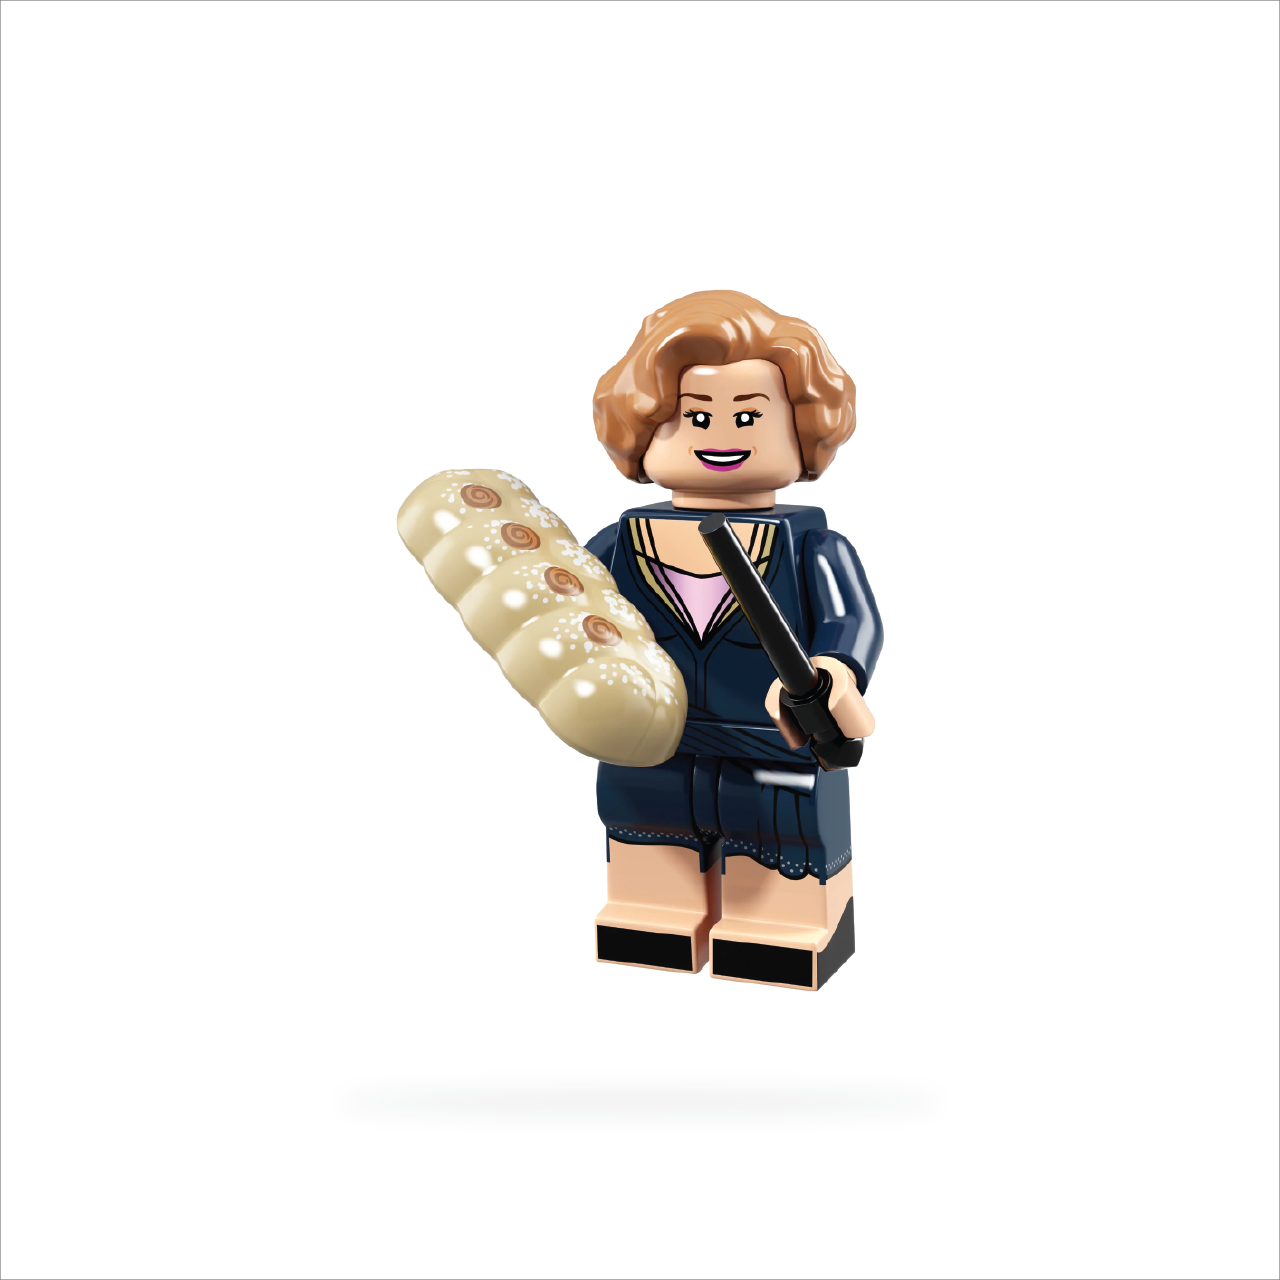 LEGO 71022-20 Minifigure Harry Potter and Fantastic Beasts Series 1 - Queenie Goldstein